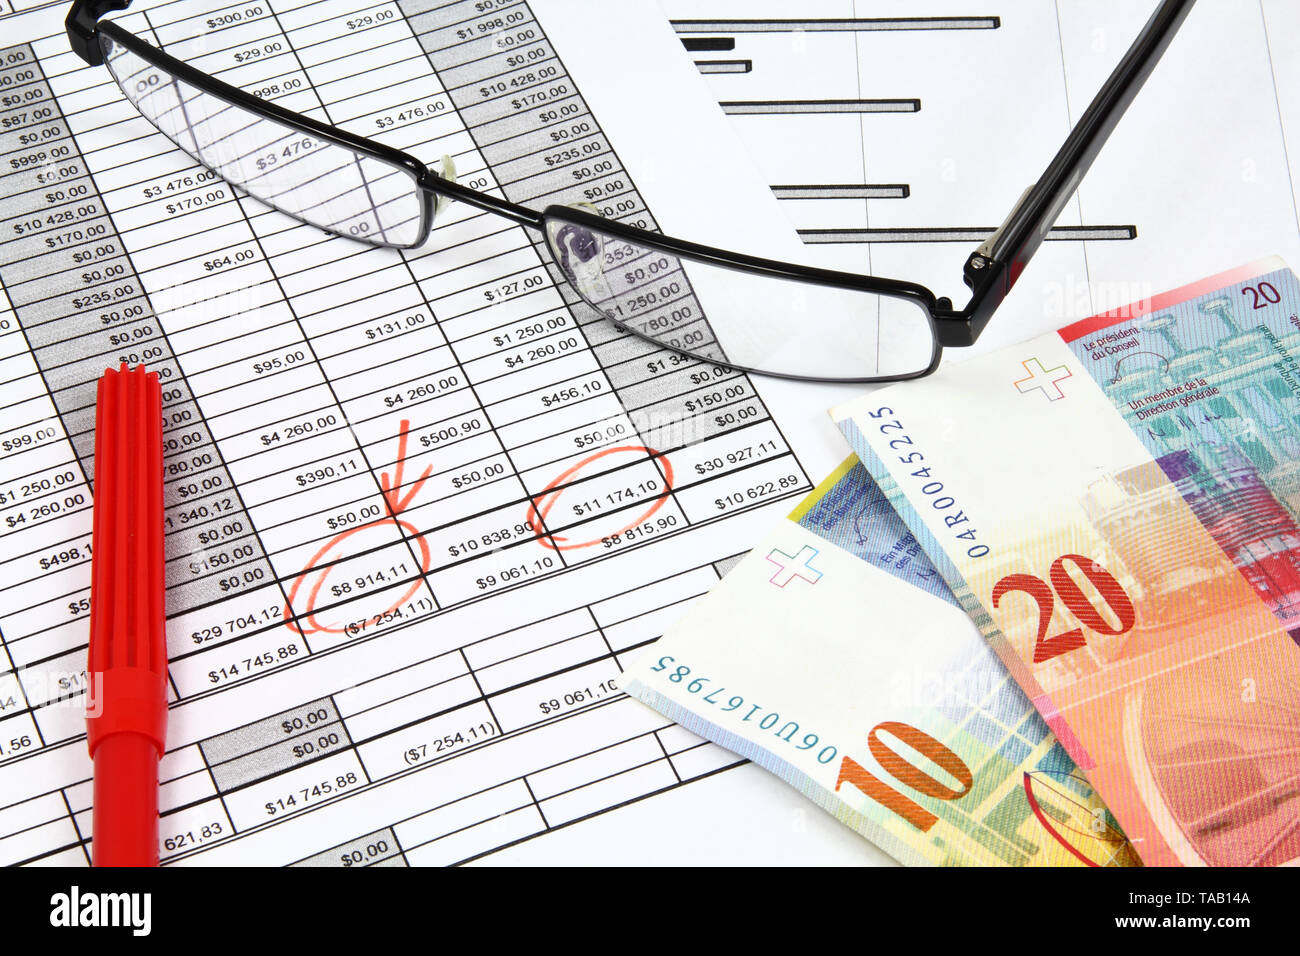 Business composition. Financial analysis - income statement, finance graphs, Swiss frank money and glasses. Stock Photo